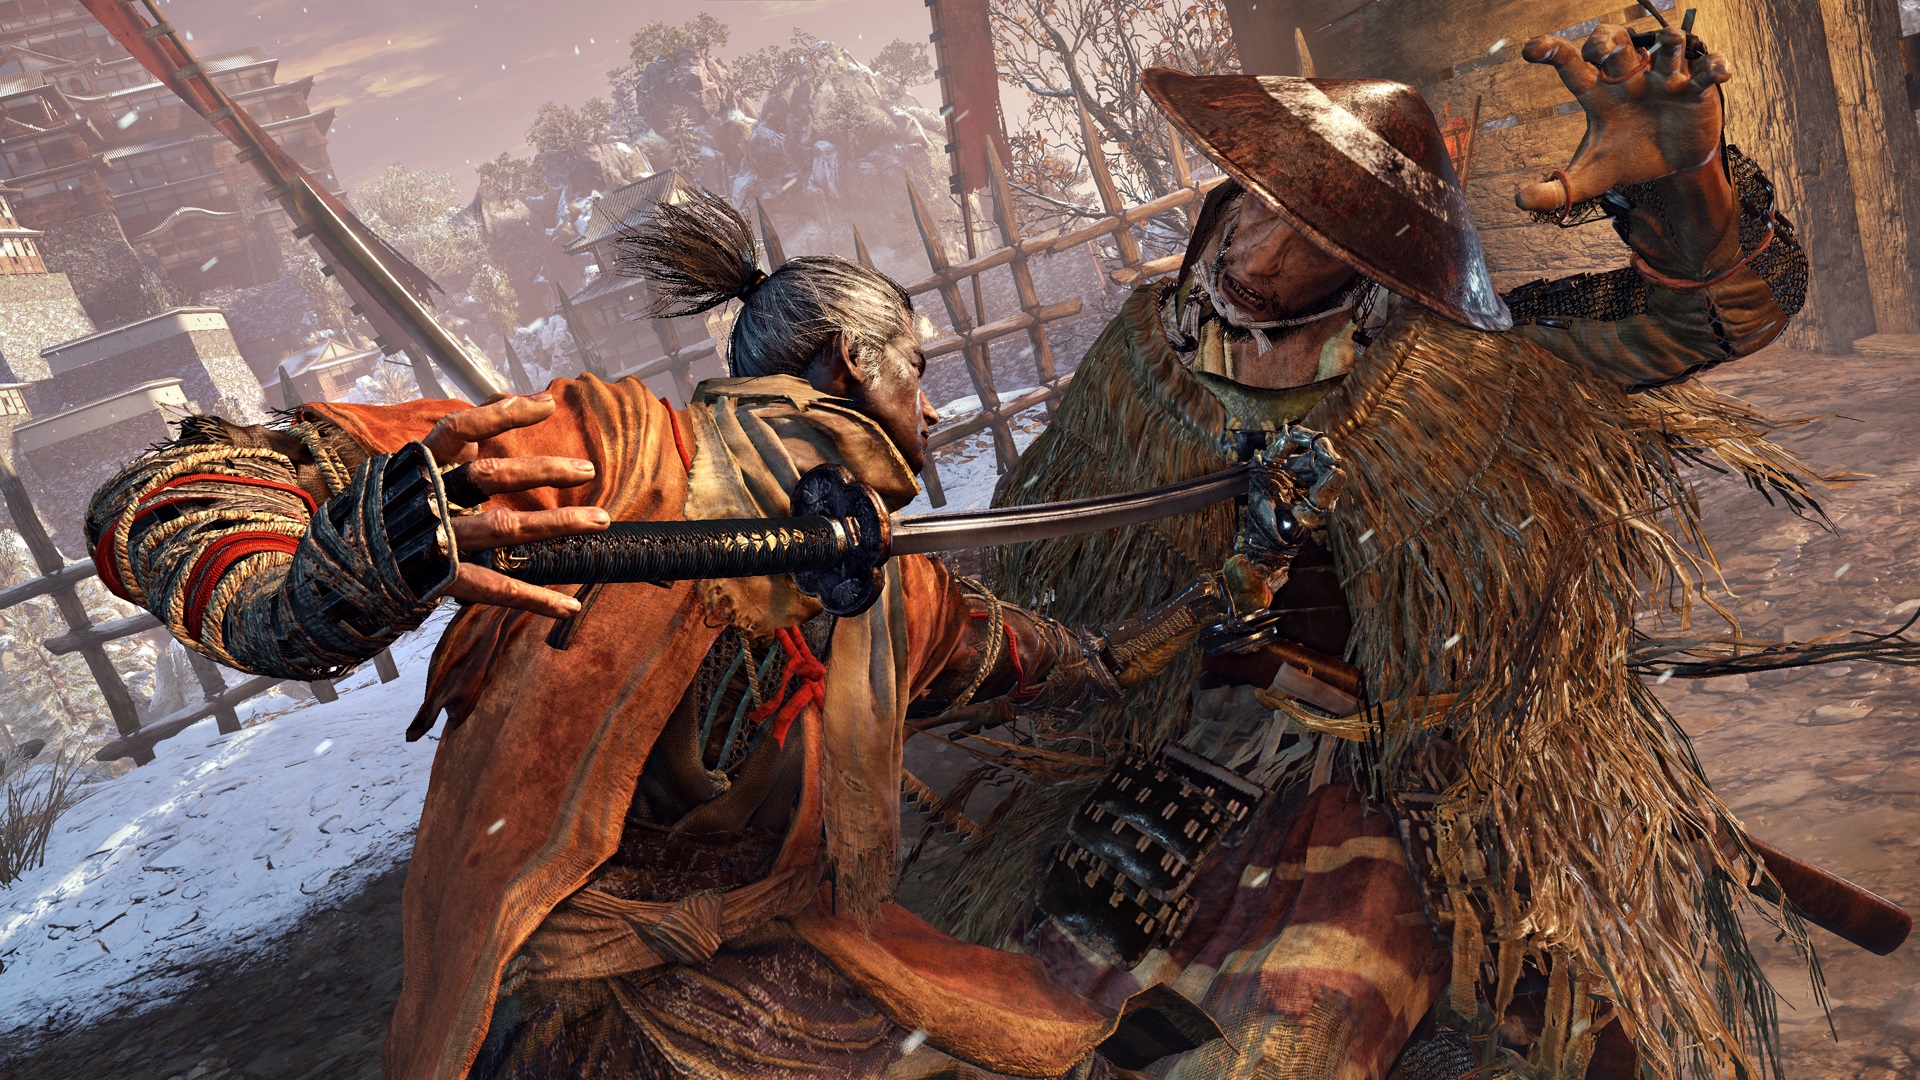 12 Minutes of Gameplay for Sekiro: Shadows Die Twice